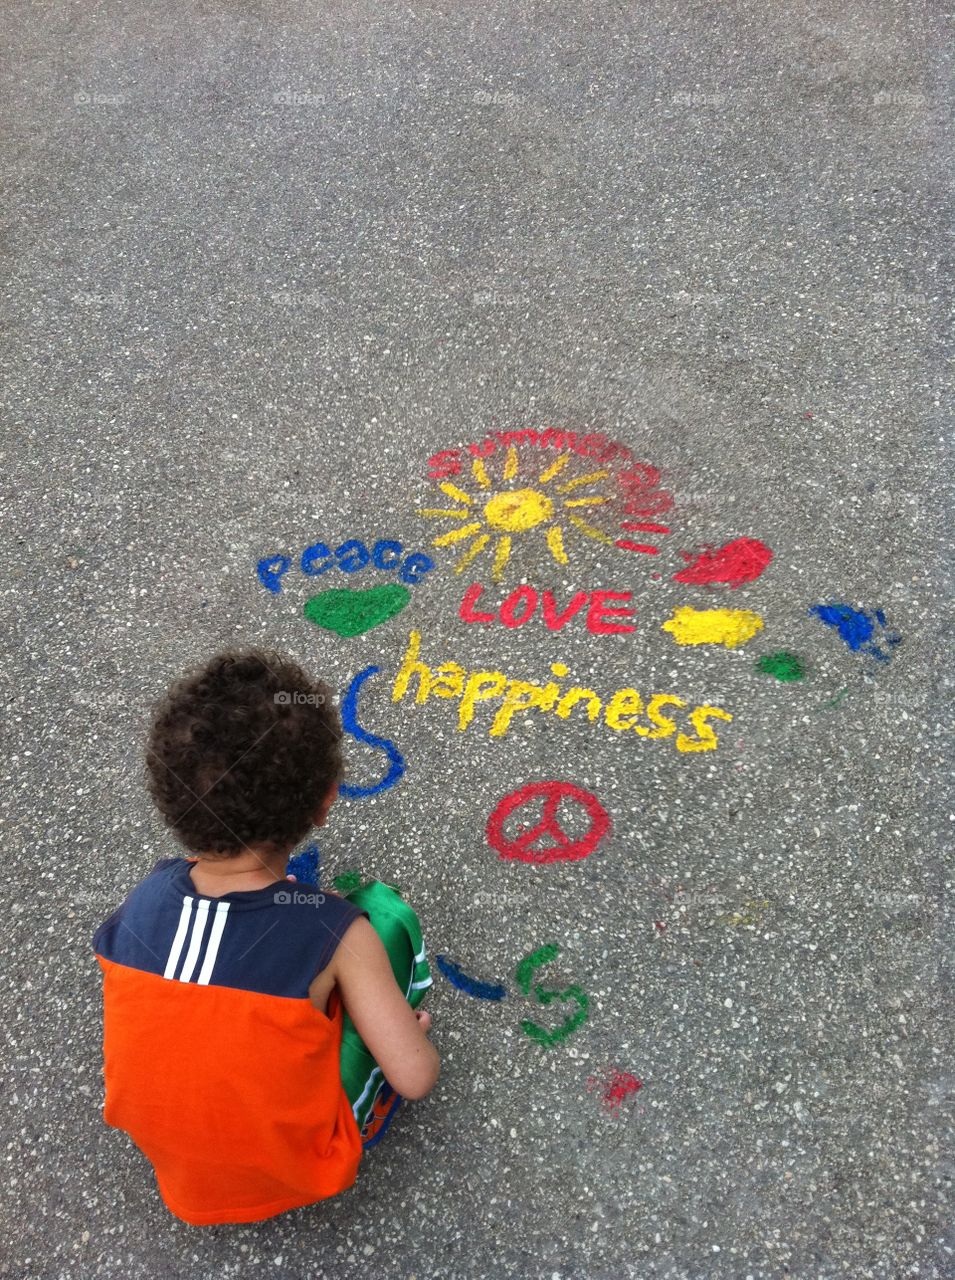 Peace Love Happiness. Admiring some street art, spreading the love  